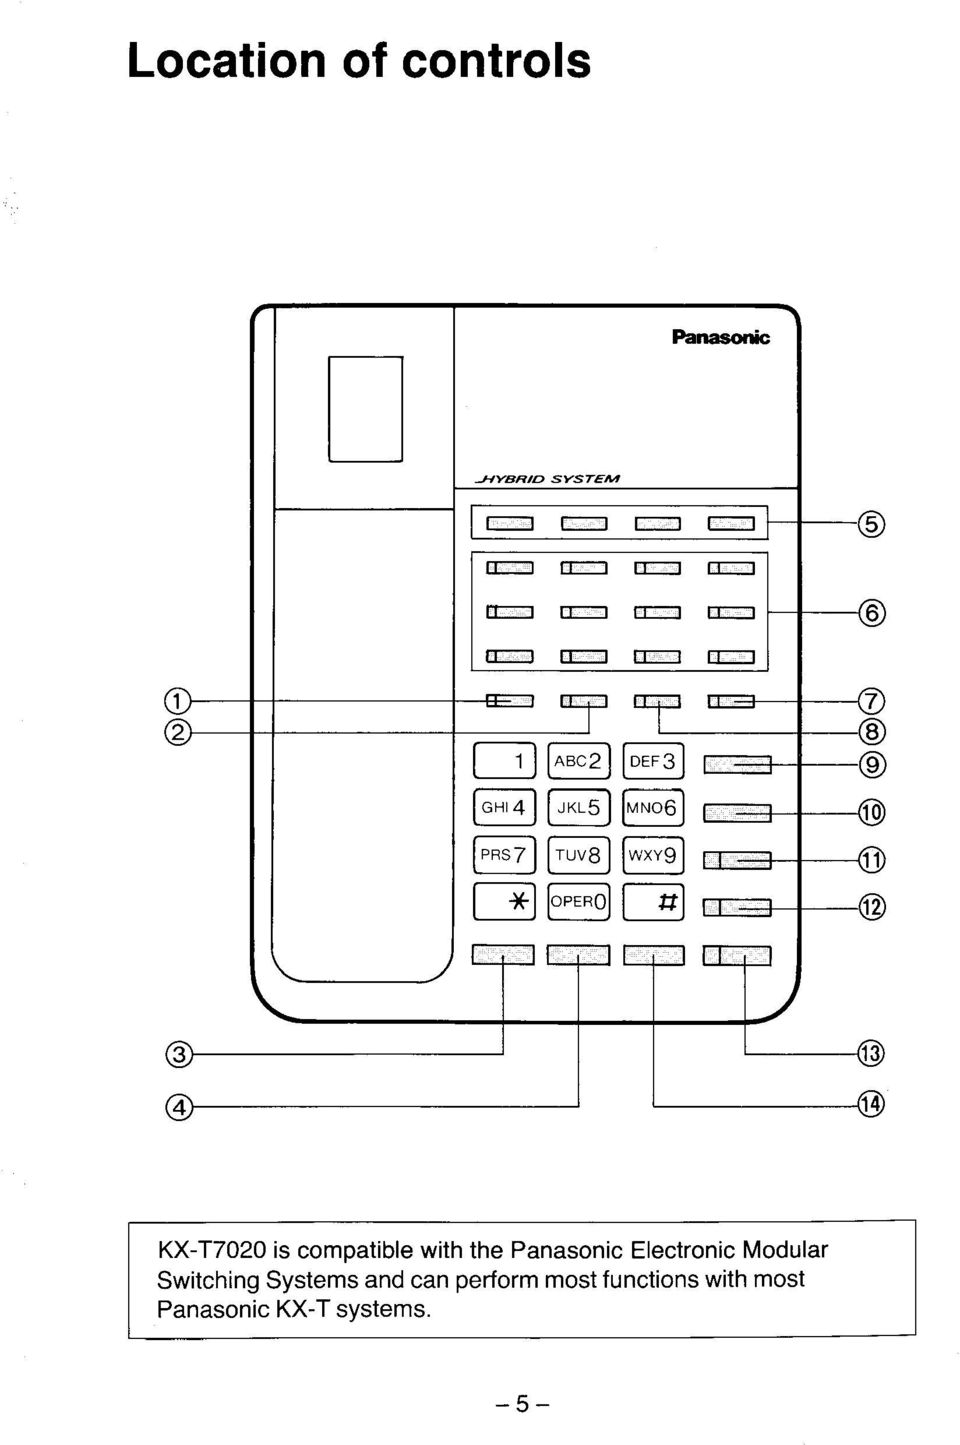 Electronic Modular Switching Systems and can